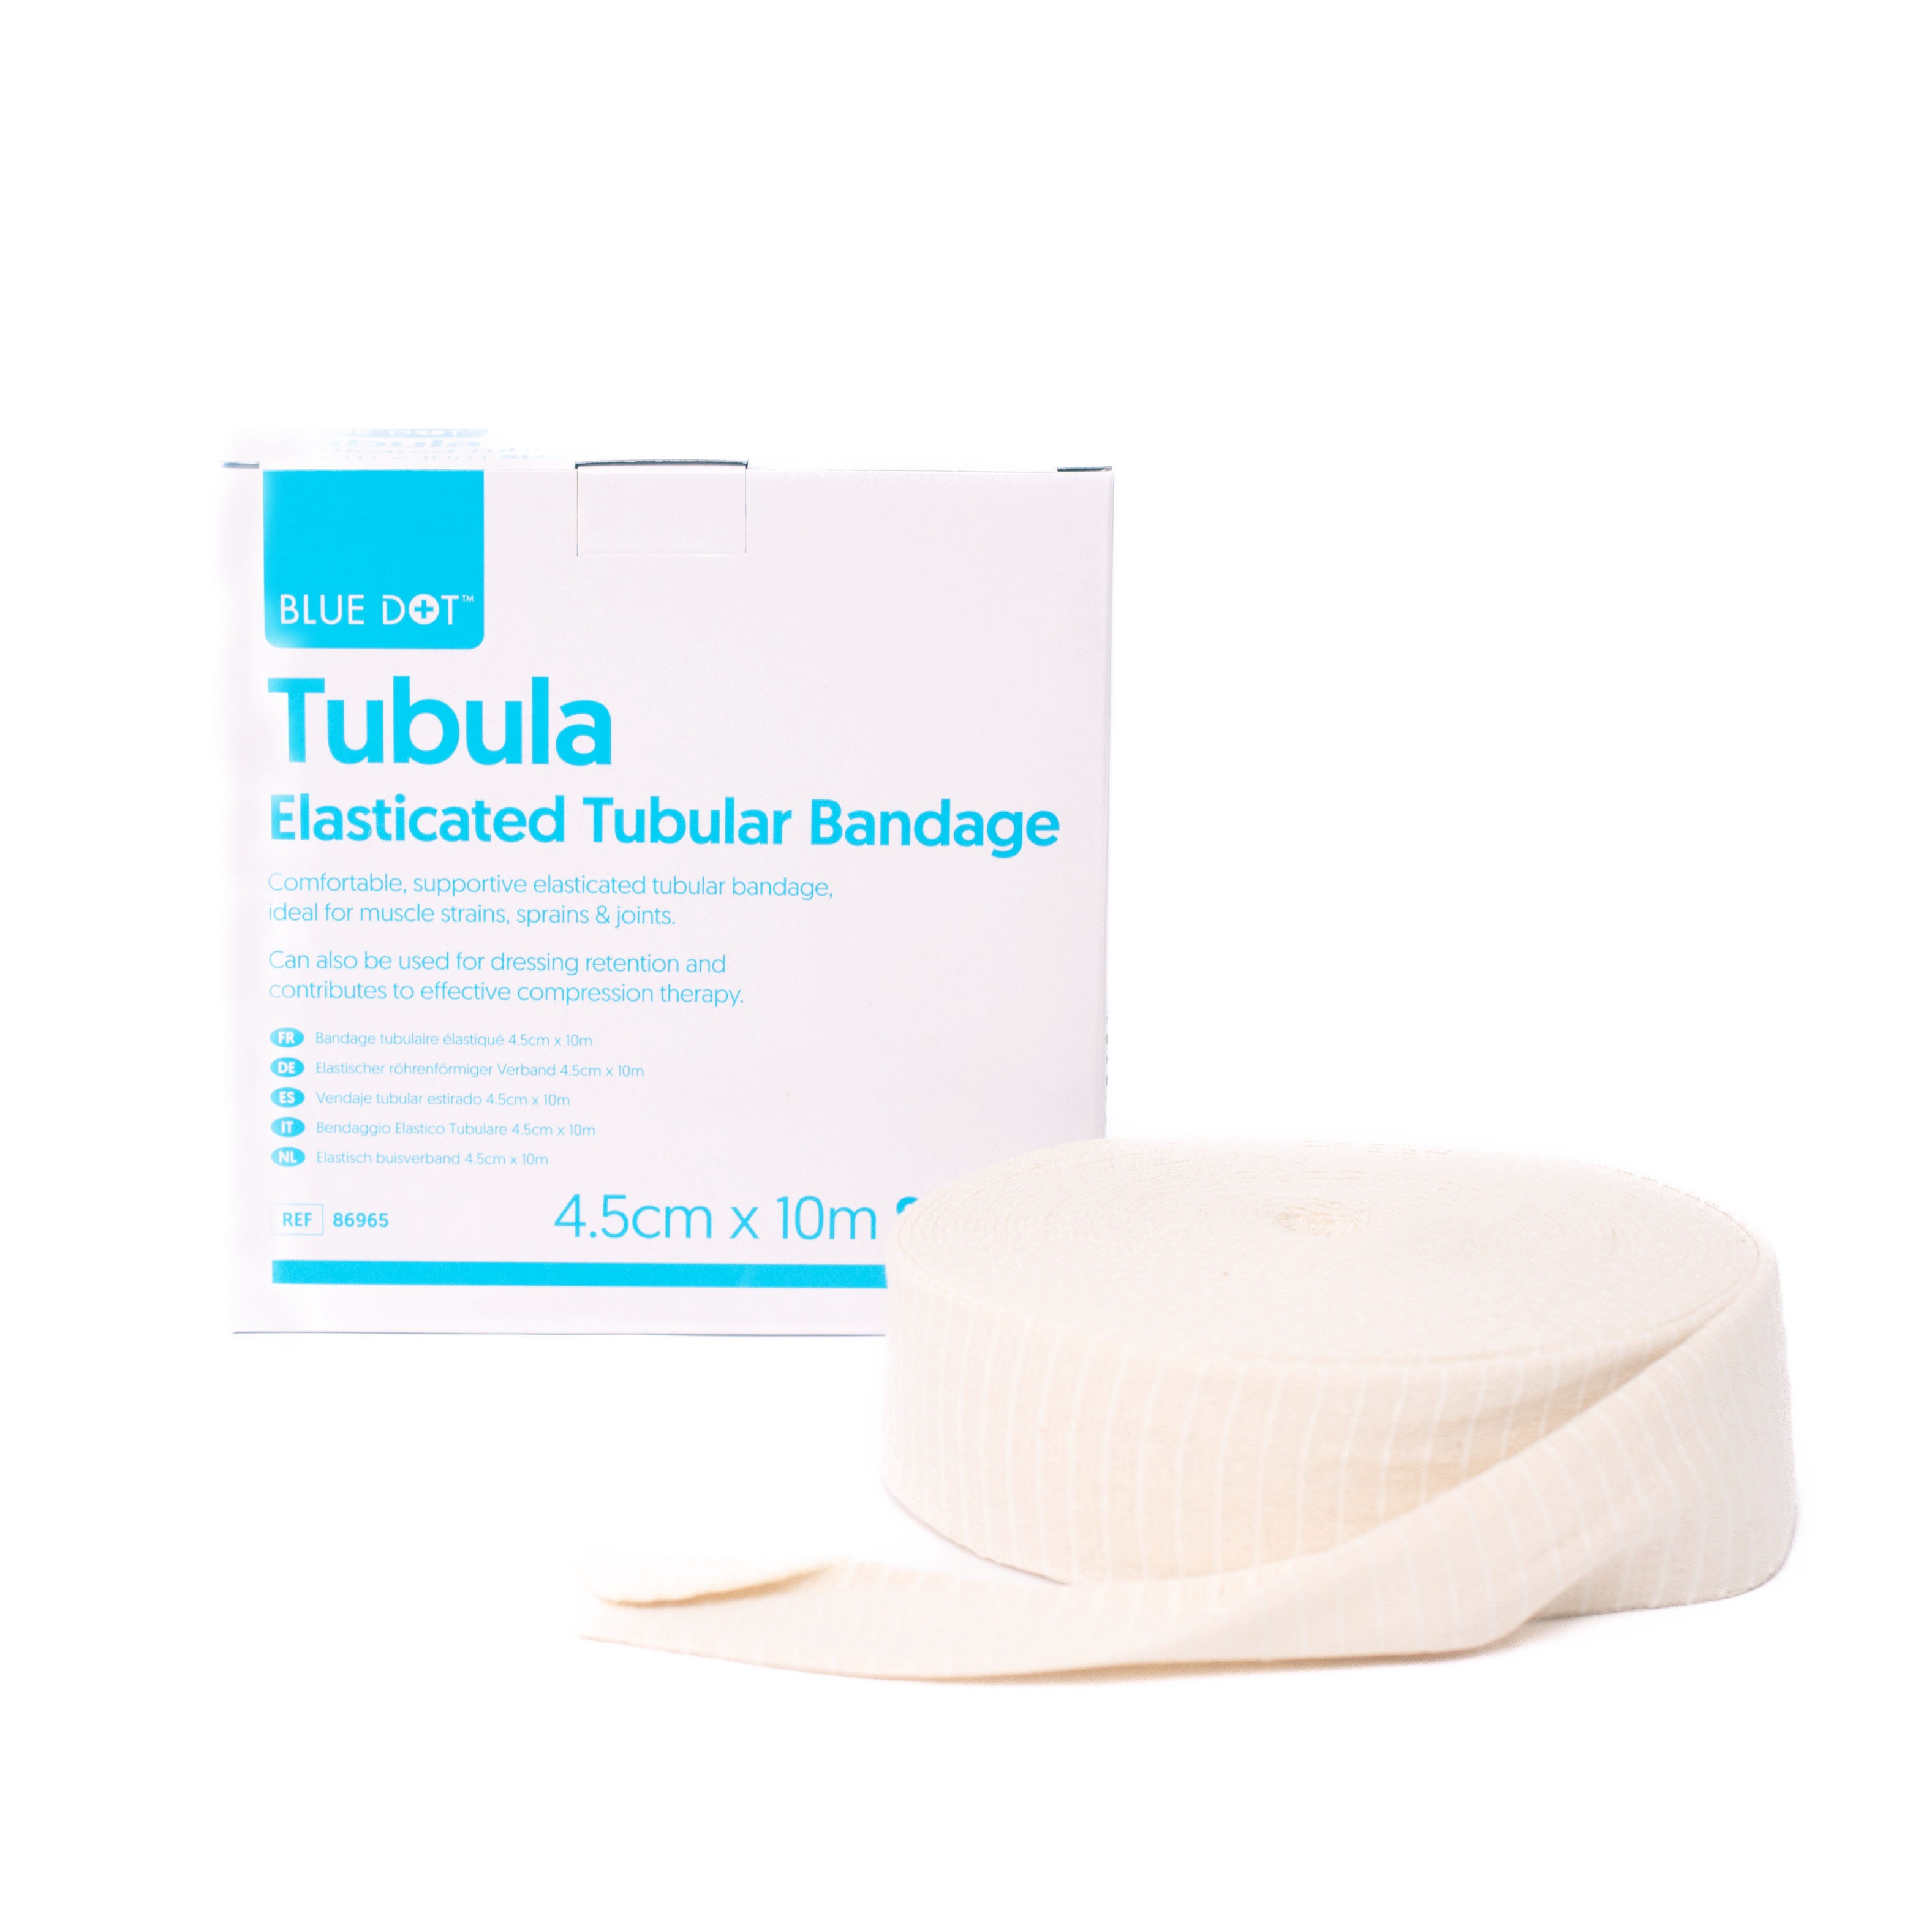 Elasticated Tubular Bandages - Available in a Variety of Sizes